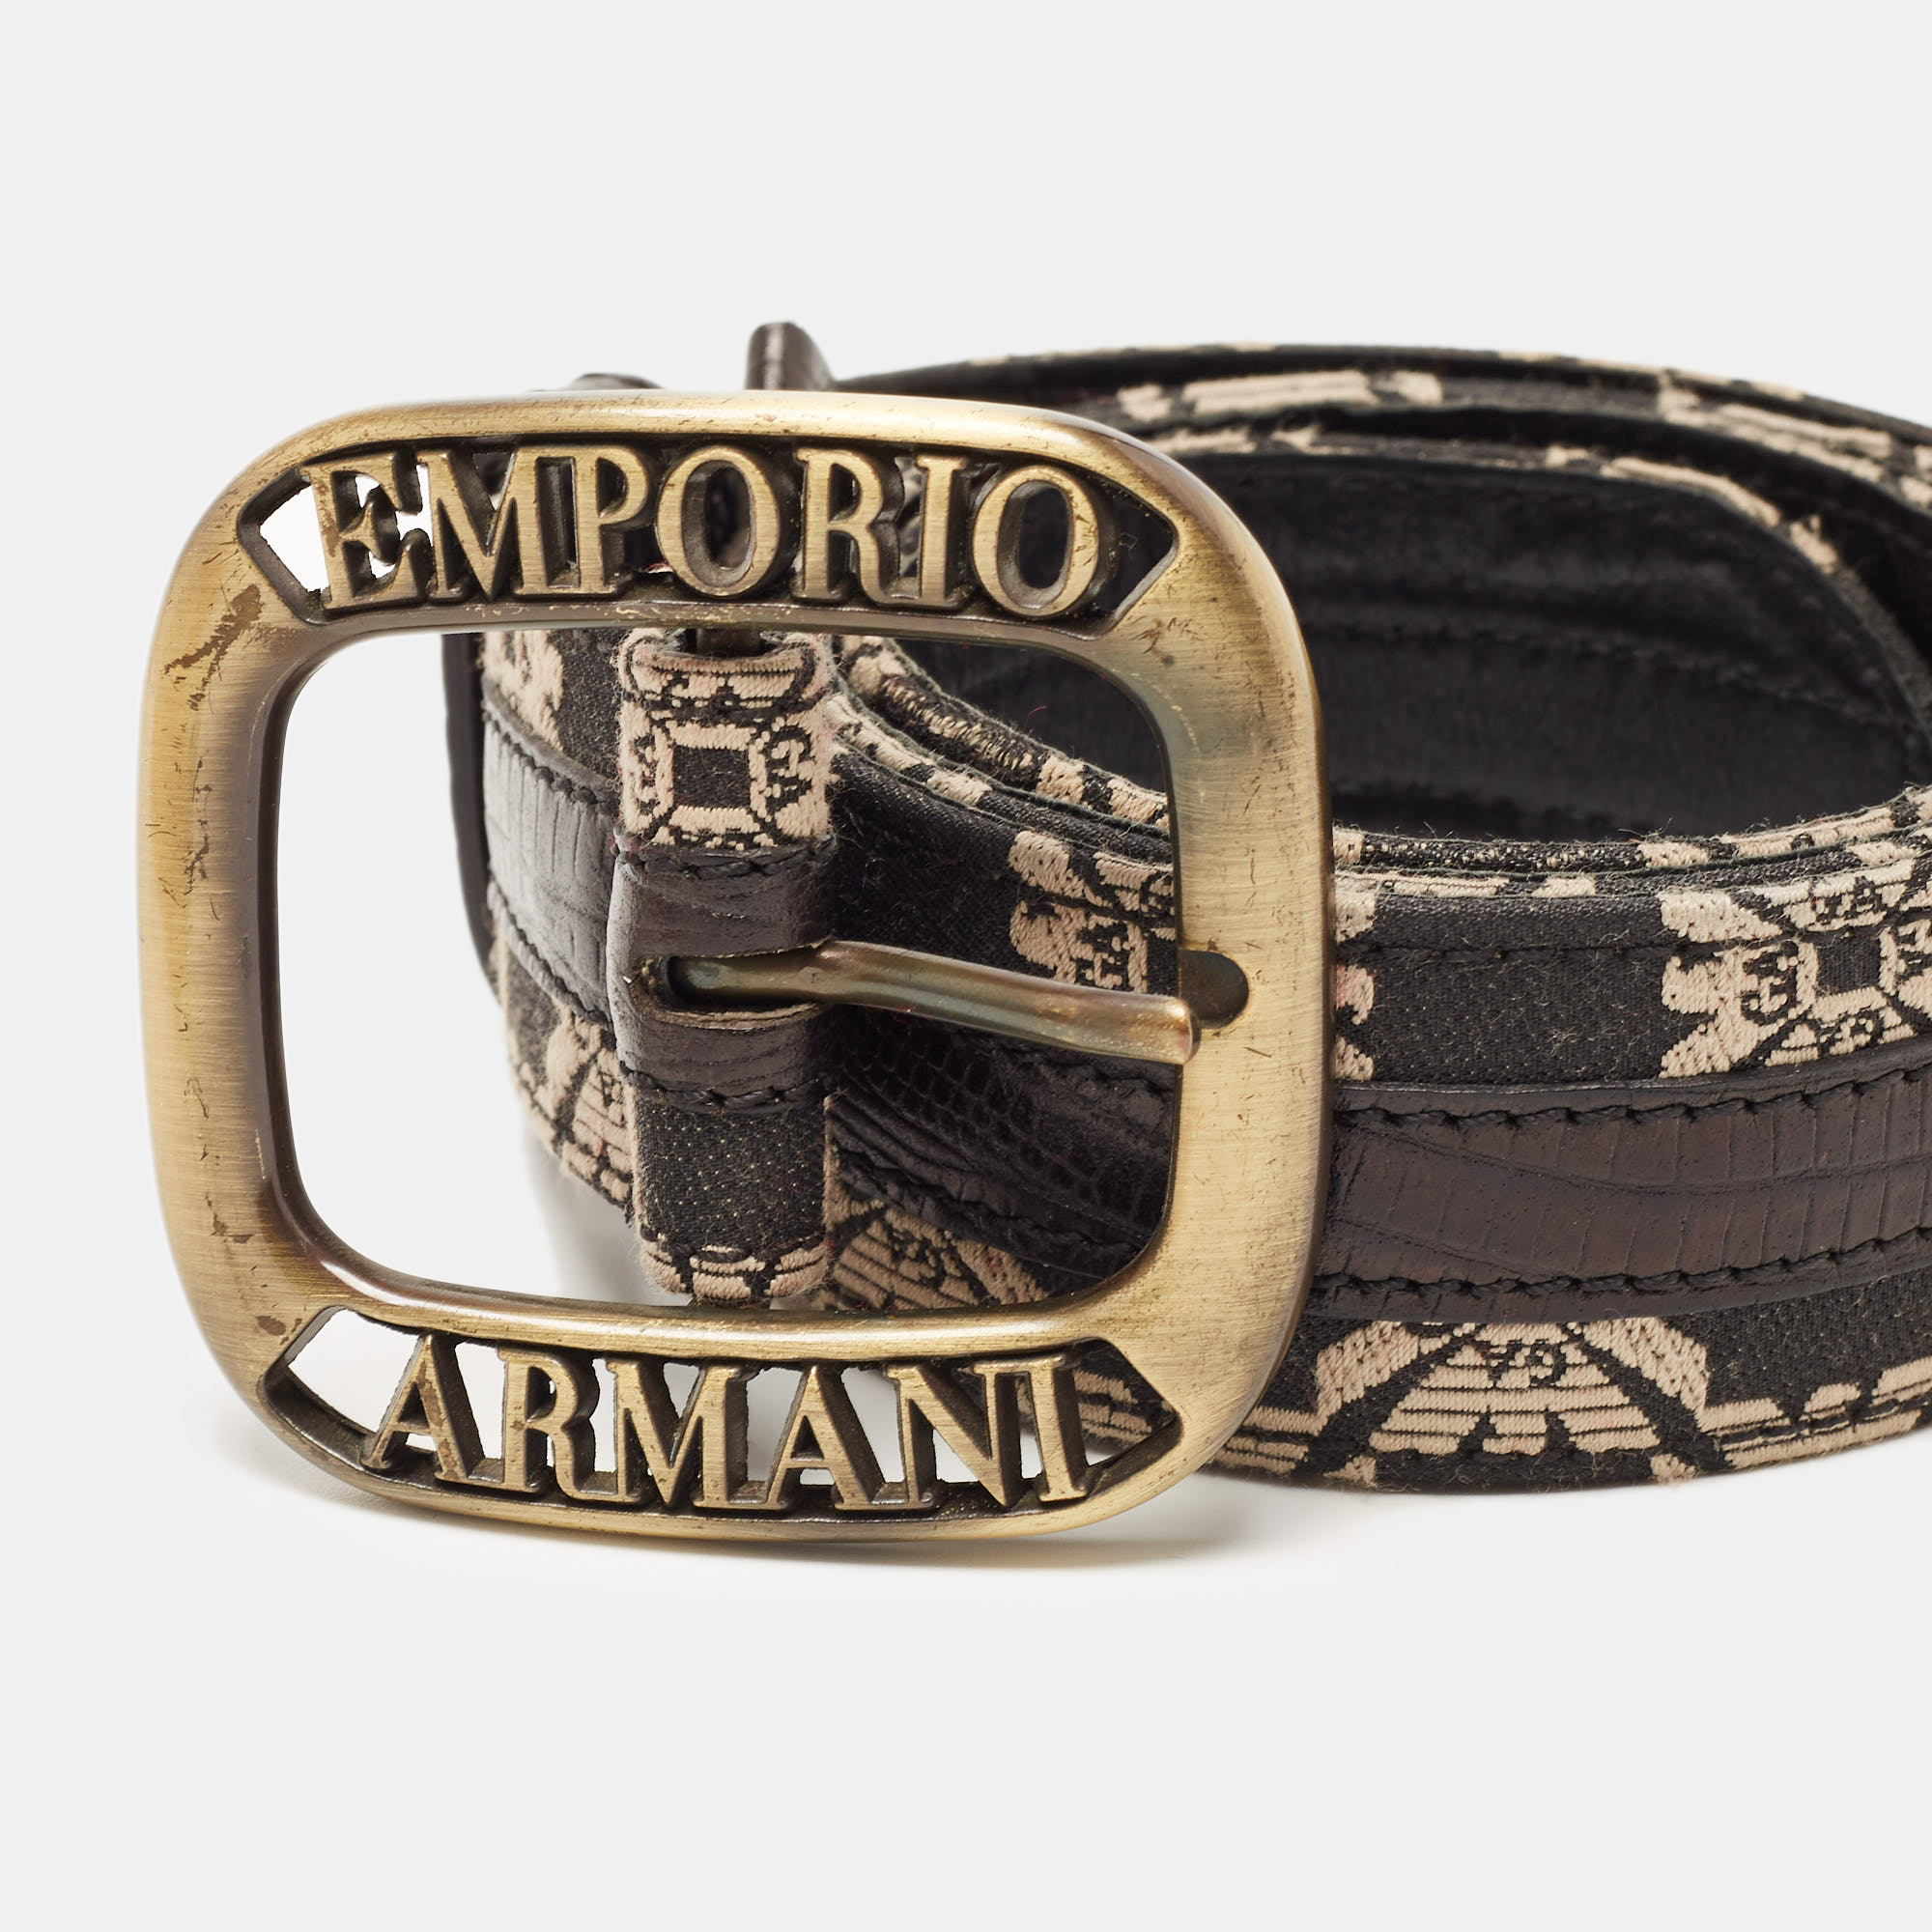 Emporio Armani Black/White Canvas And Lizard Embossed Leather Logo Buckle Belt 100 CM